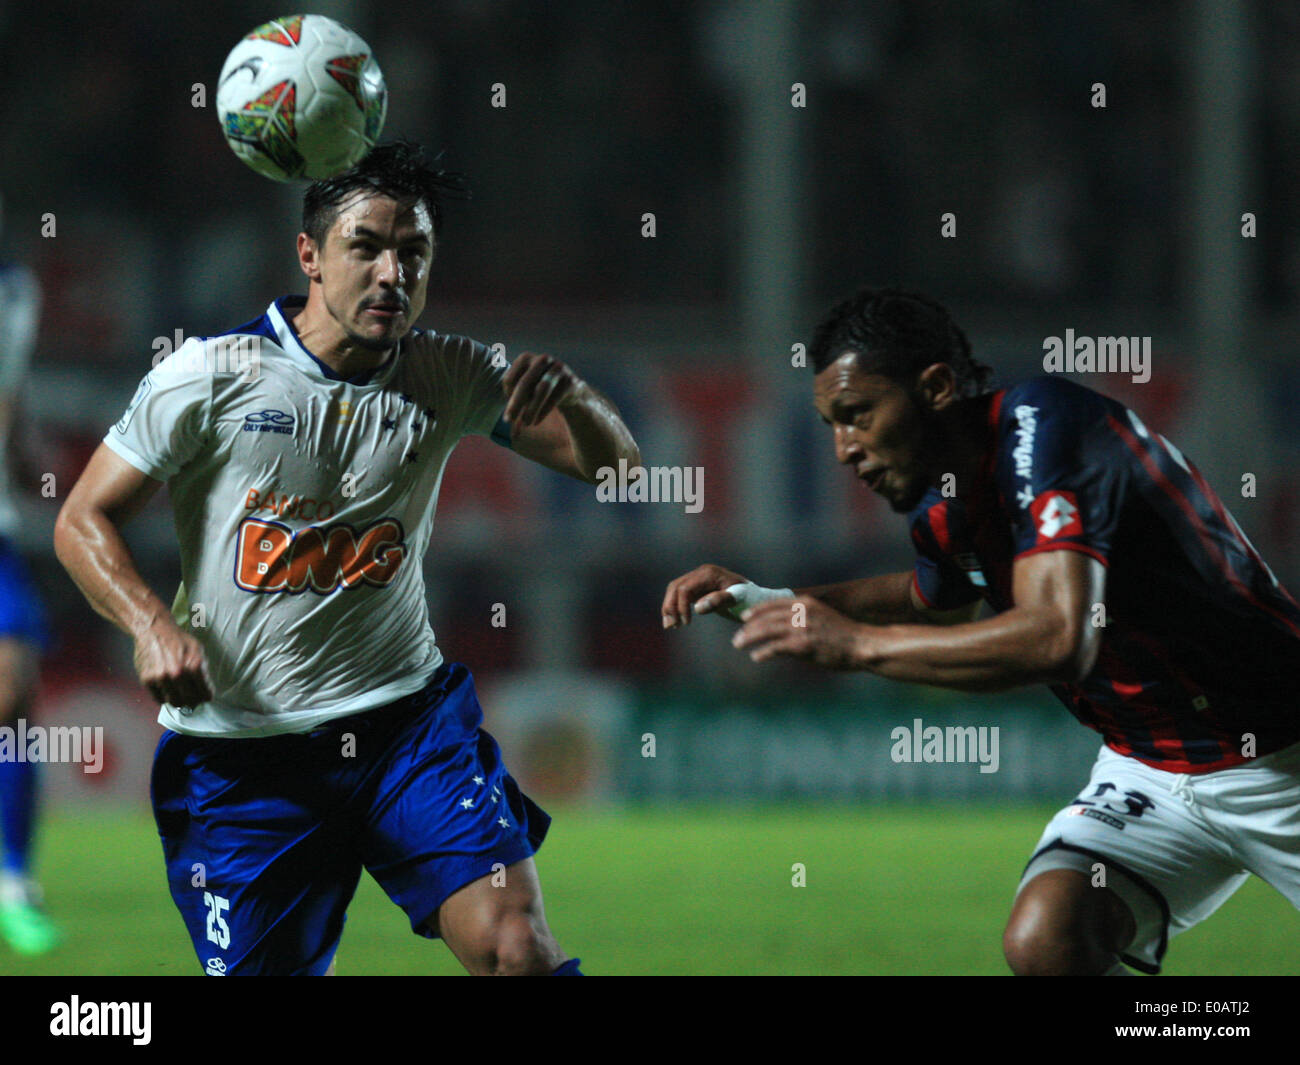 Buenos Aires, Argentina. 7th May, 2014. San Lorenzo's Carlos Valdes (R) vies for the ball with Cruzeiro's William (L), during their first leg quarterfinal match of the 2014 Libertadores Cup at Pedro Bidegain Stadium, in Buenos Aires, Argentina, on May 7, 2014. © Martin Zabala/Xinhua/Alamy Live News Stock Photo